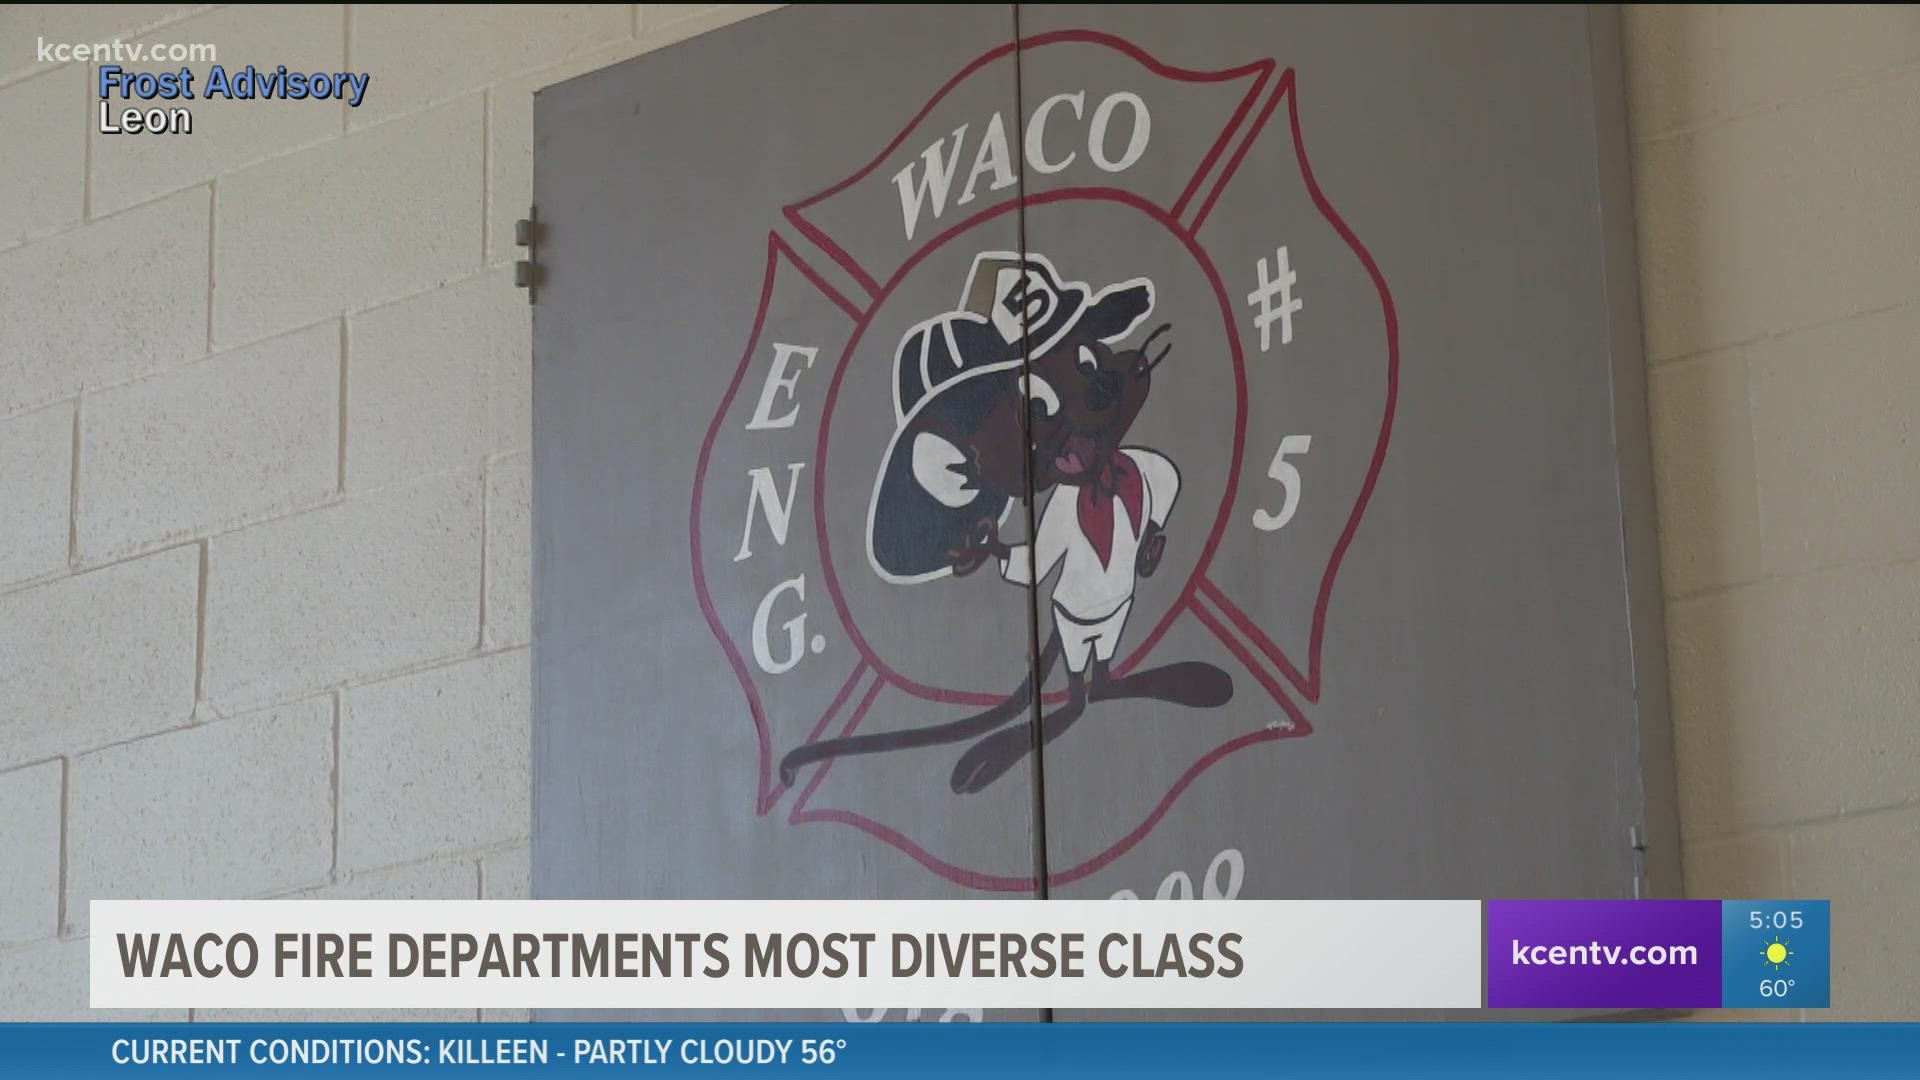 Ten more firefighters were welcome to the team, which is the most diverse class the department has ever seen.